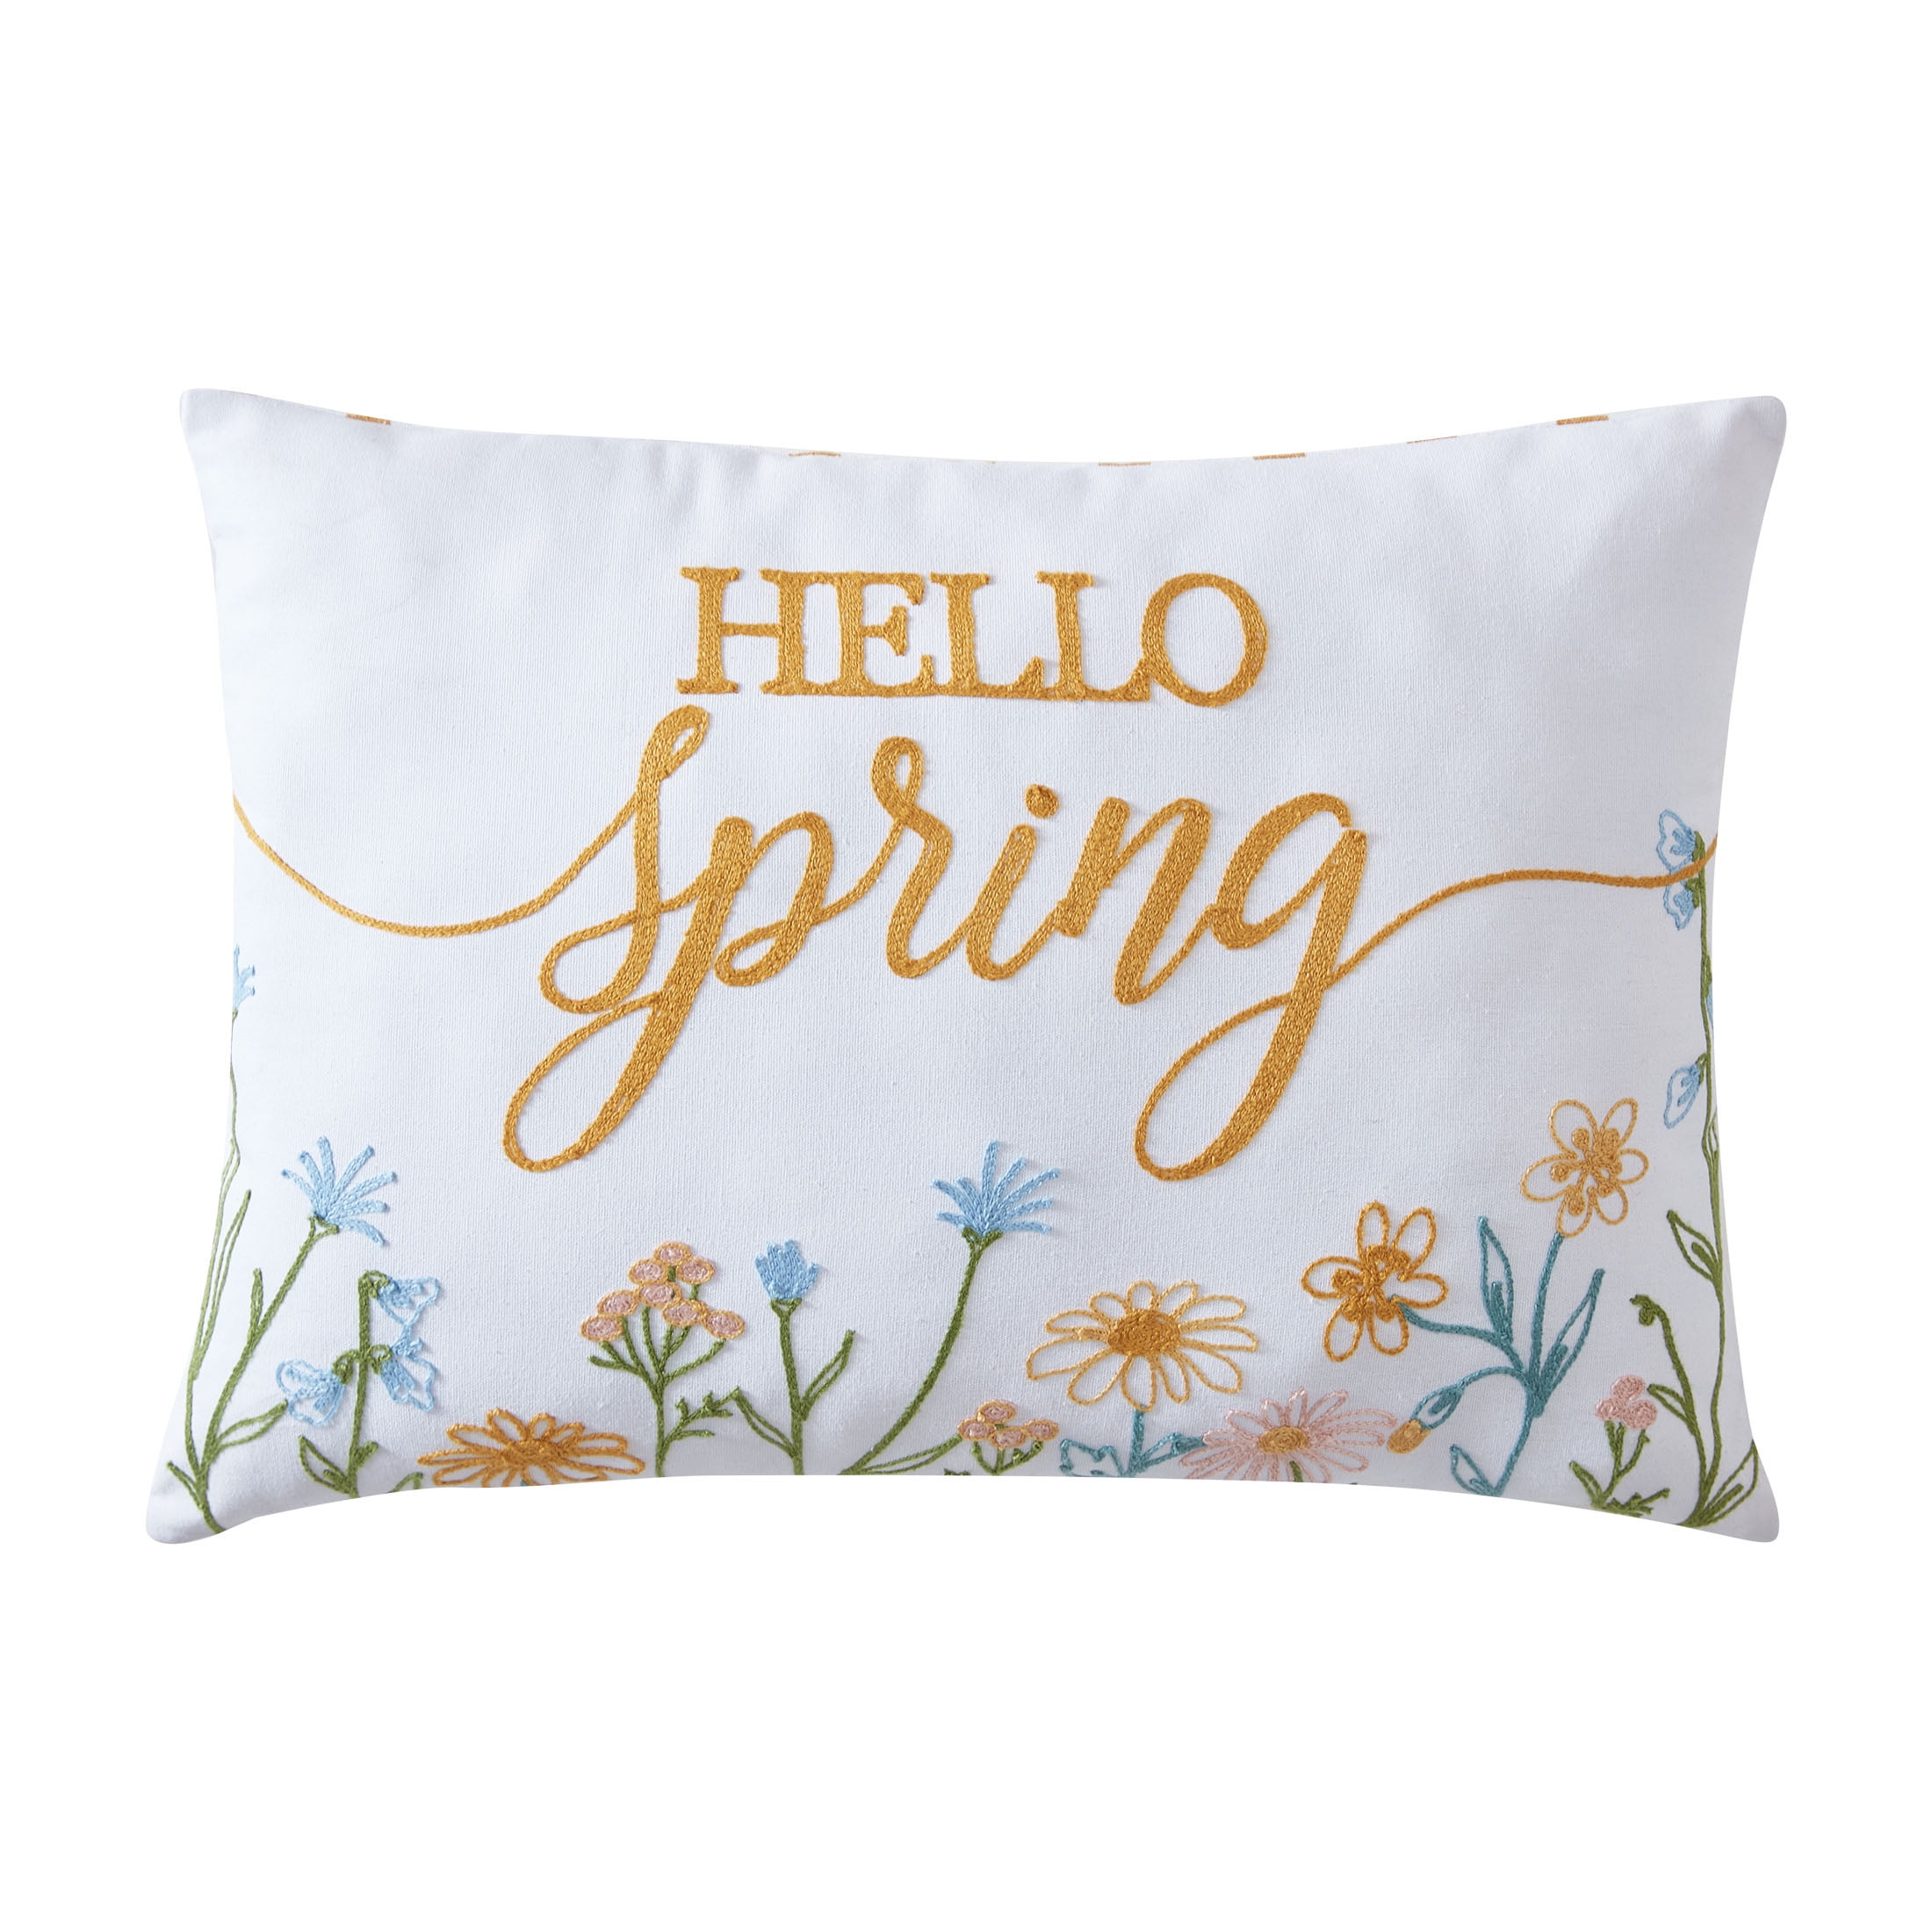 Hello Fall Pillow Cover 18x18 inch – Cotton and Crate